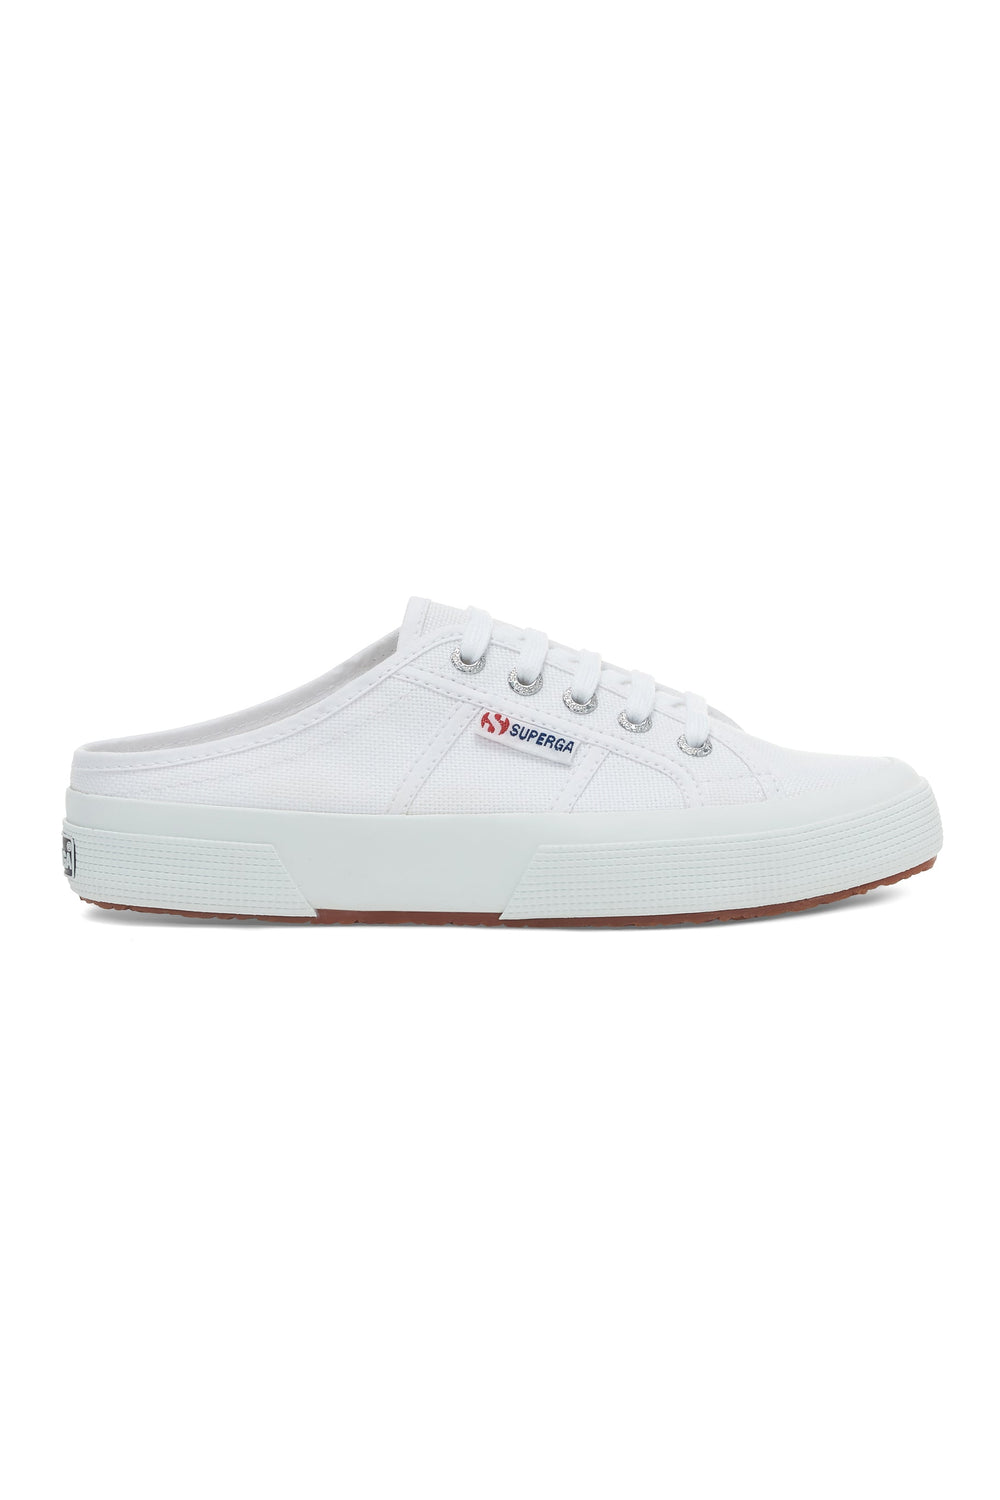 Petal and Pup USA SHOES 2402 Mule - White